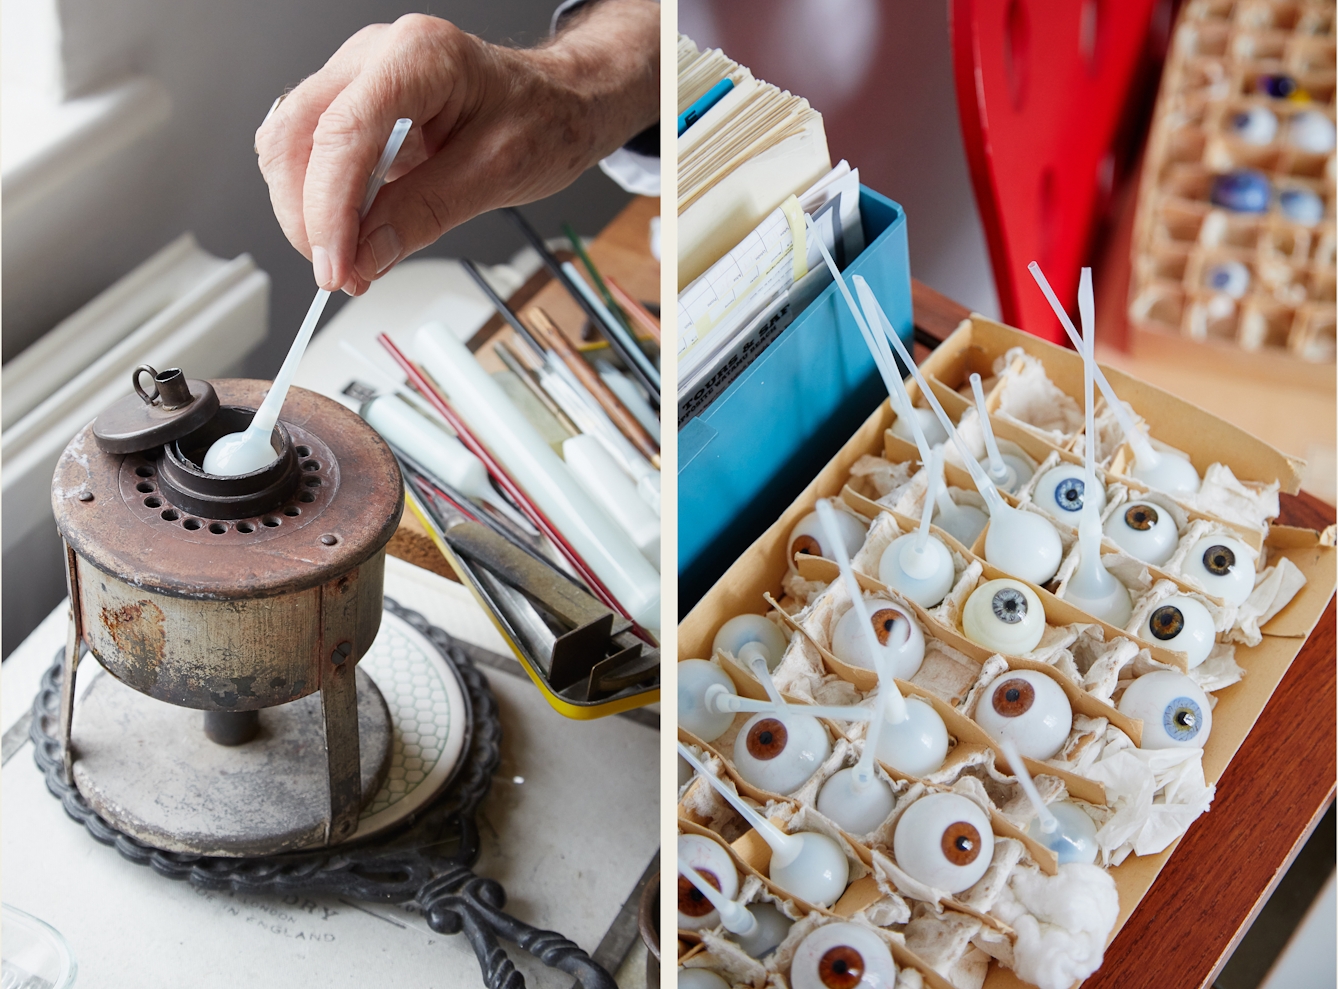 A photographic diptych. The image on the right shows a hand holding a white glass tube with a sphere at one end, into a metal contraption standing on a workbench. The image on the right shows a close-up detail of a partitioned cardboard box containing various glass eyes of differing coloured irises, some with a long white glass tube still attached.